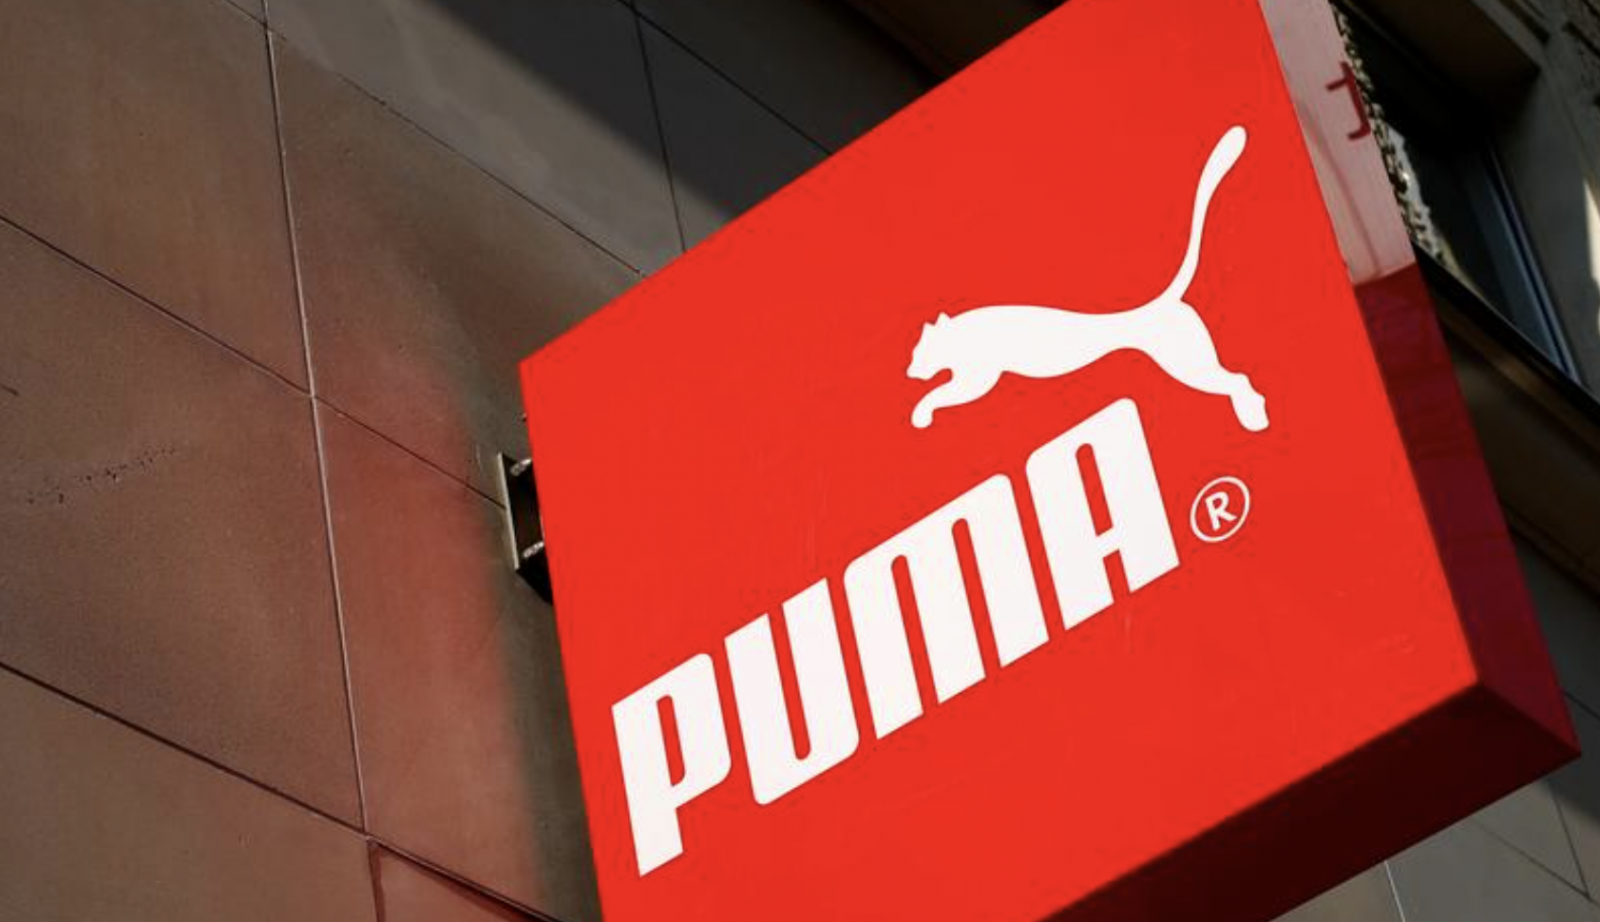 Running boom to help Puma recover after slow start